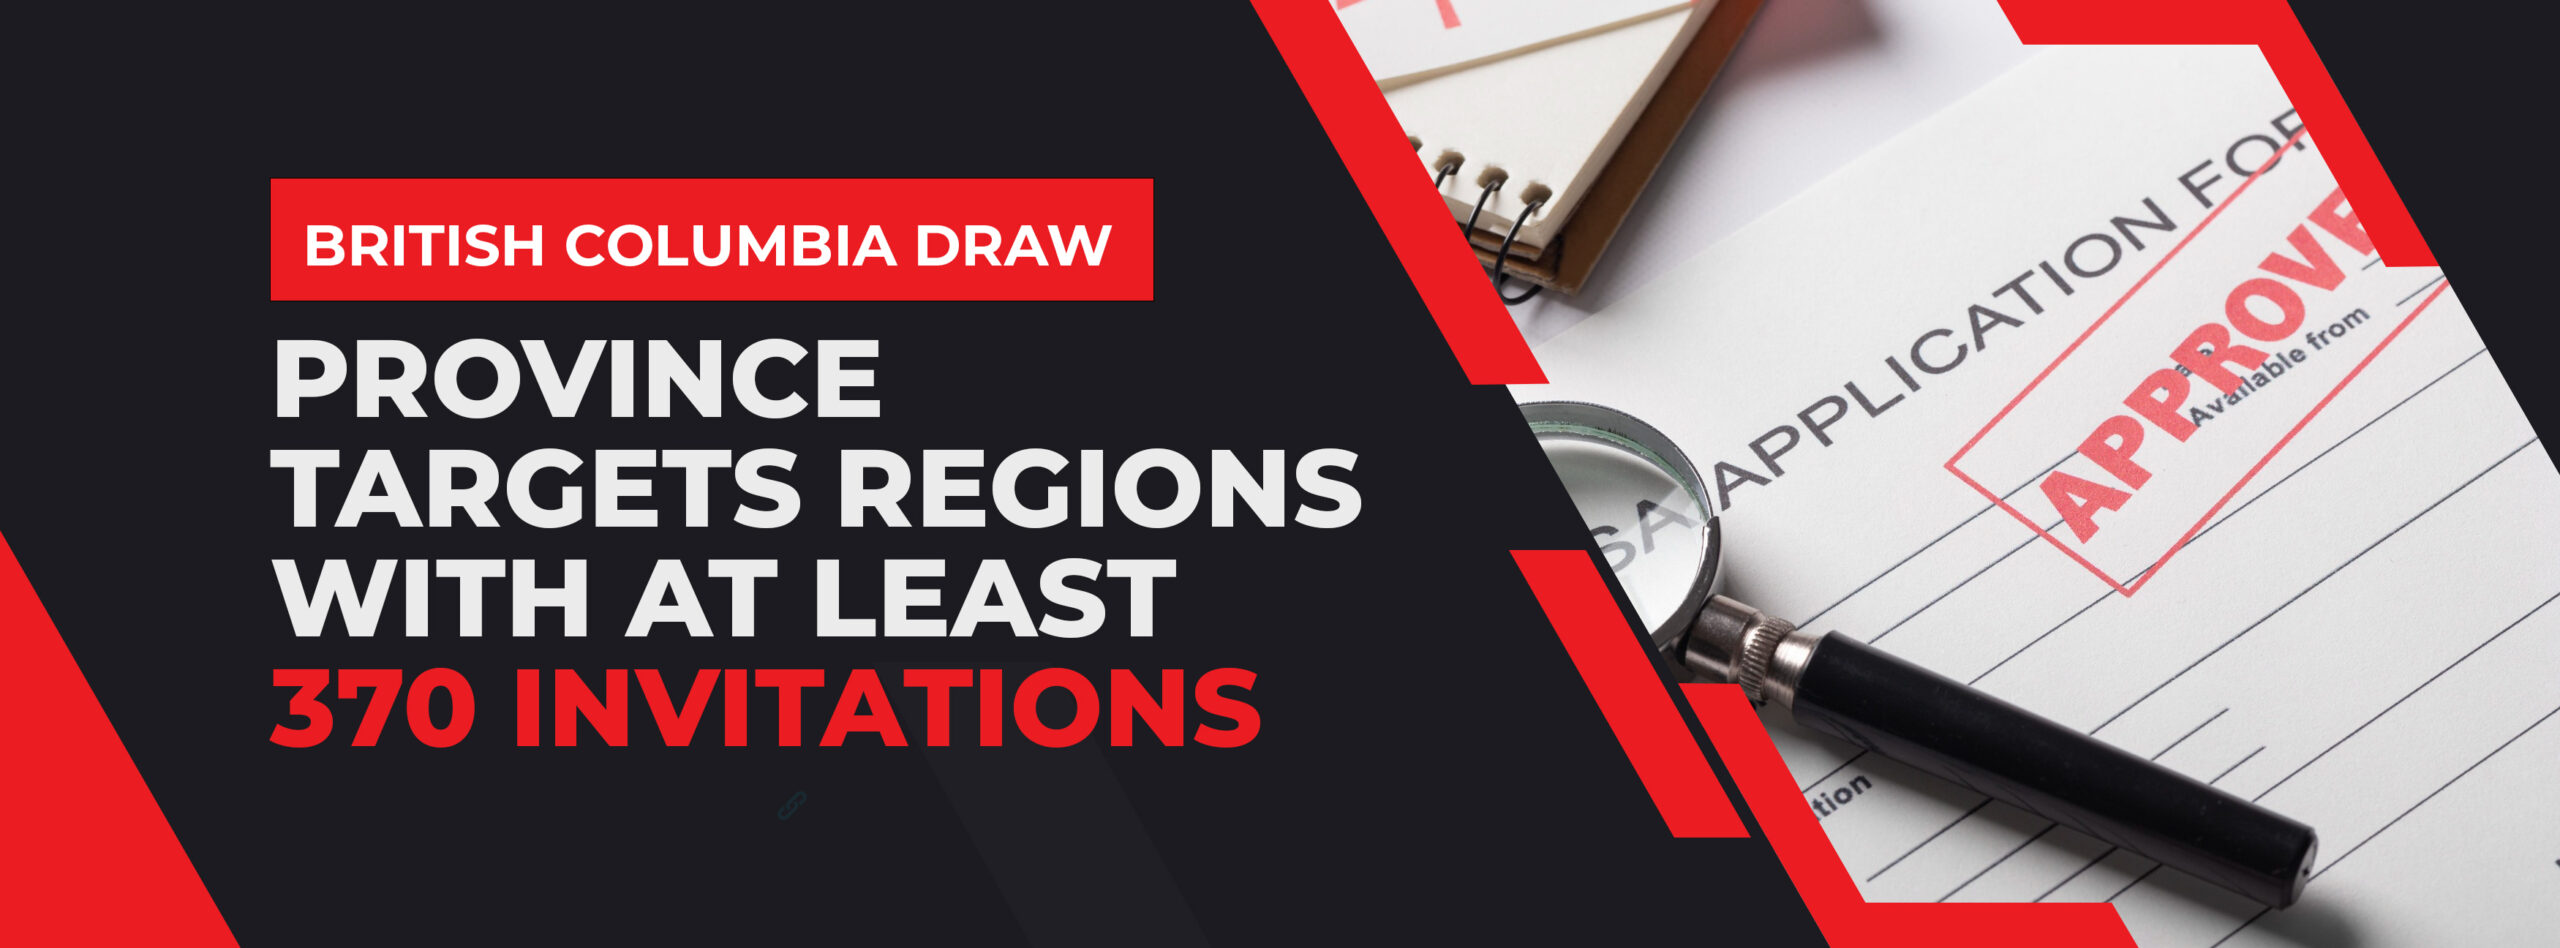 British Columbia Draw – Province Targets Regions With At Least 370 Invitations